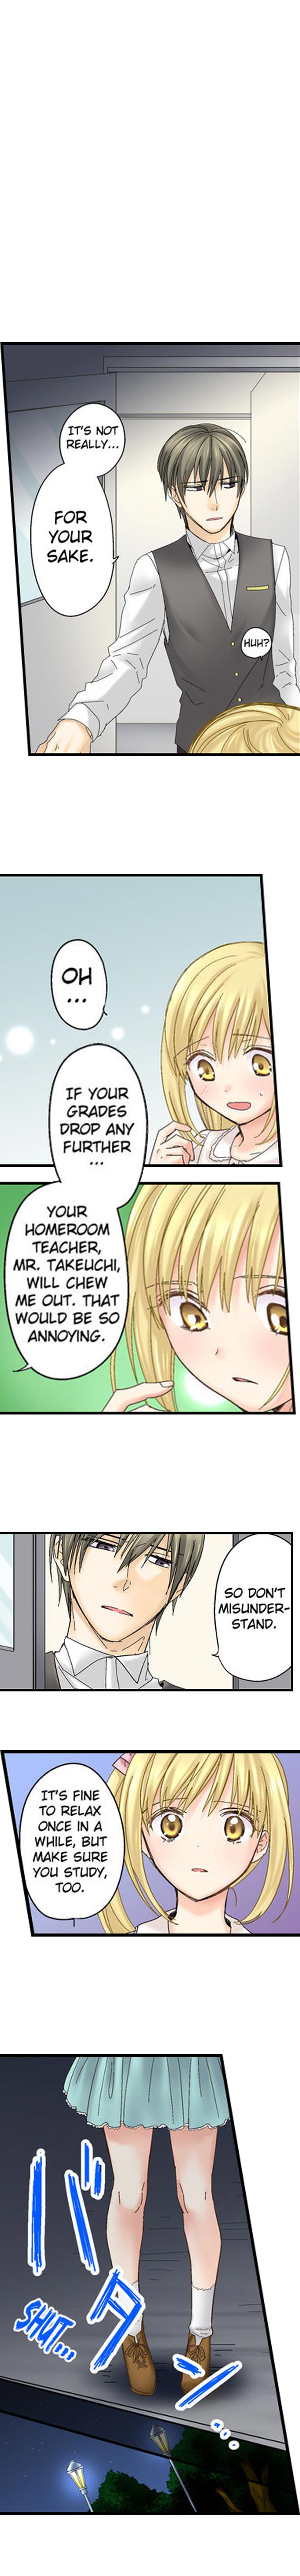 Running a Love Hotel with My Math Teacher - Chapter 18 Page 7